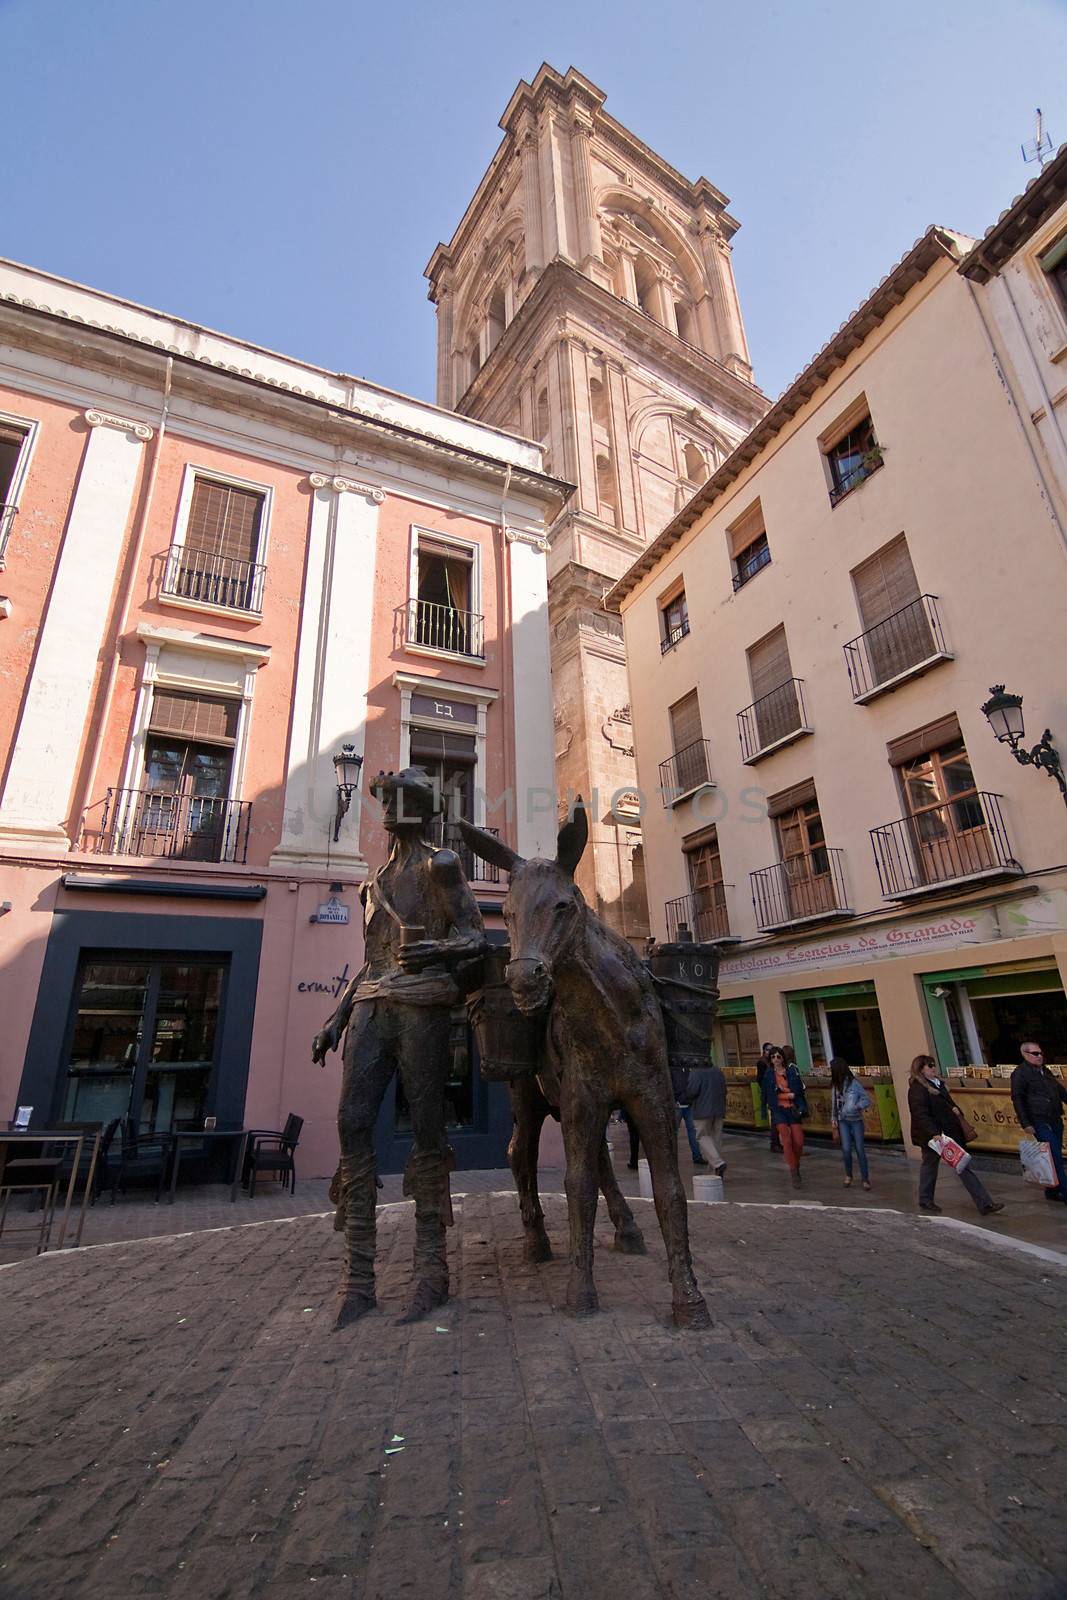 Romanillas square also called square of the donkey by the sculpture of a donkey on the side of the square, Granada, Spain